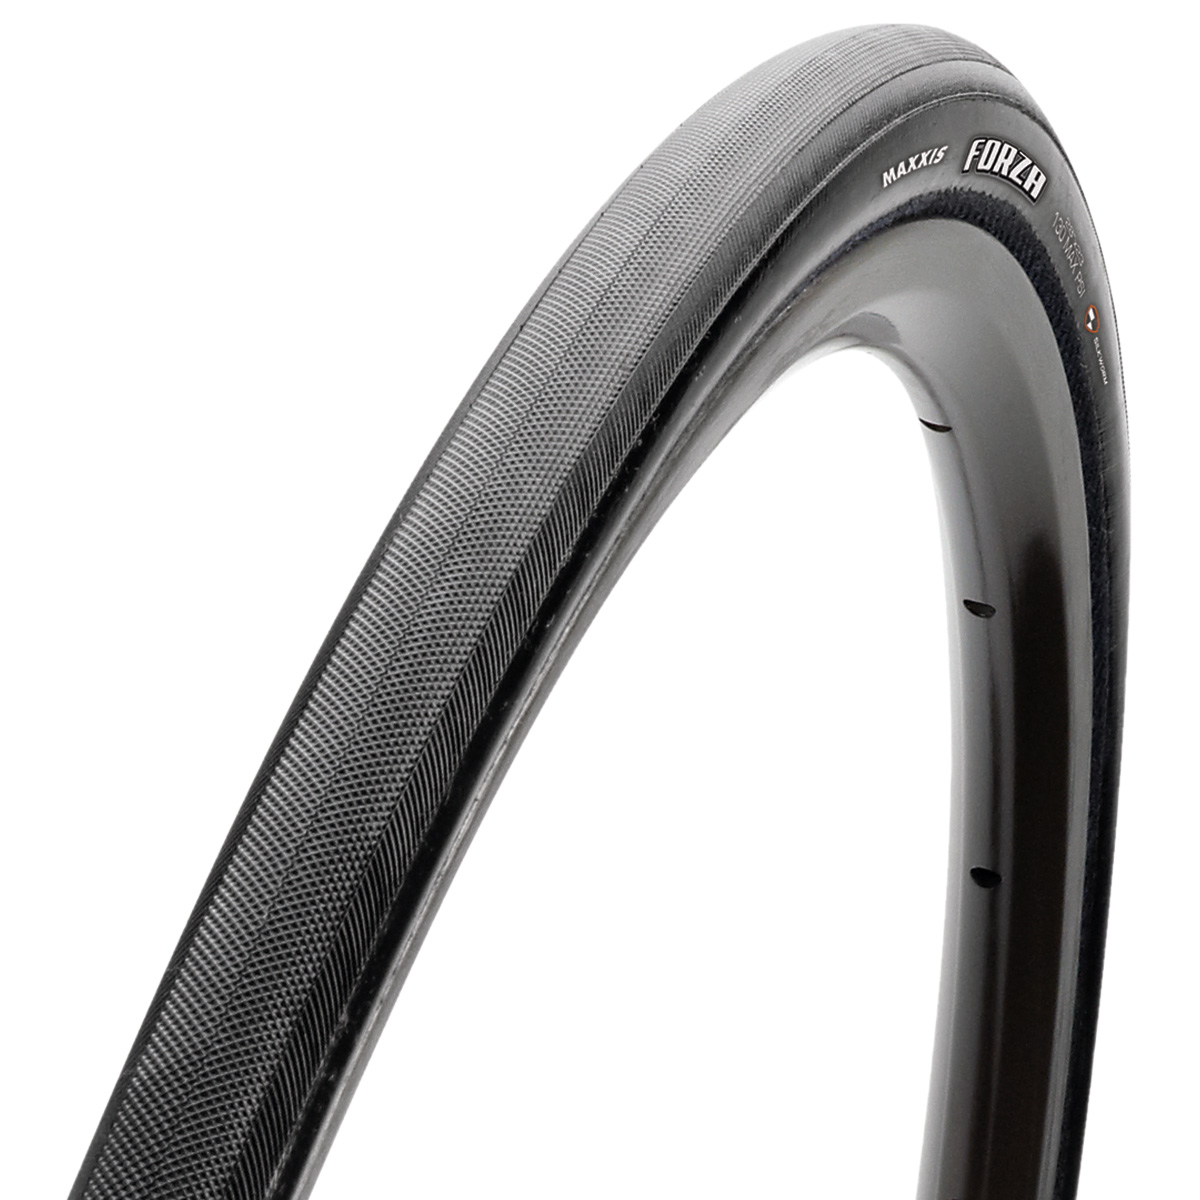 new in factory box Maxxis Forza 700x23 Tubular Tire Black price is for one tire 